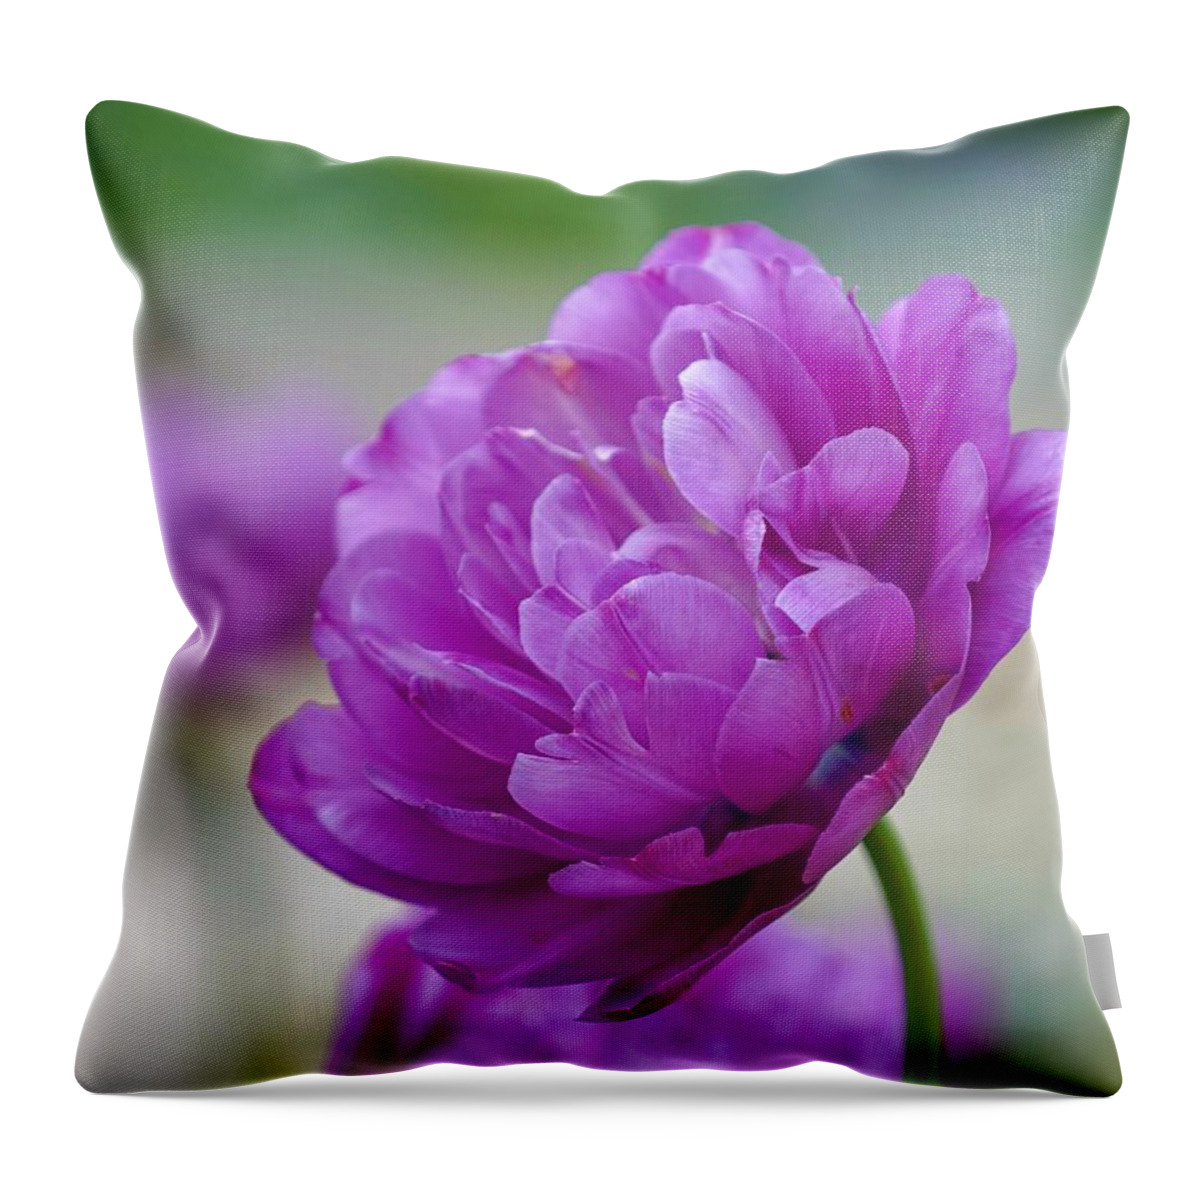 Beautiful Throw Pillow featuring the photograph Lavender Tulip by Susan Rydberg